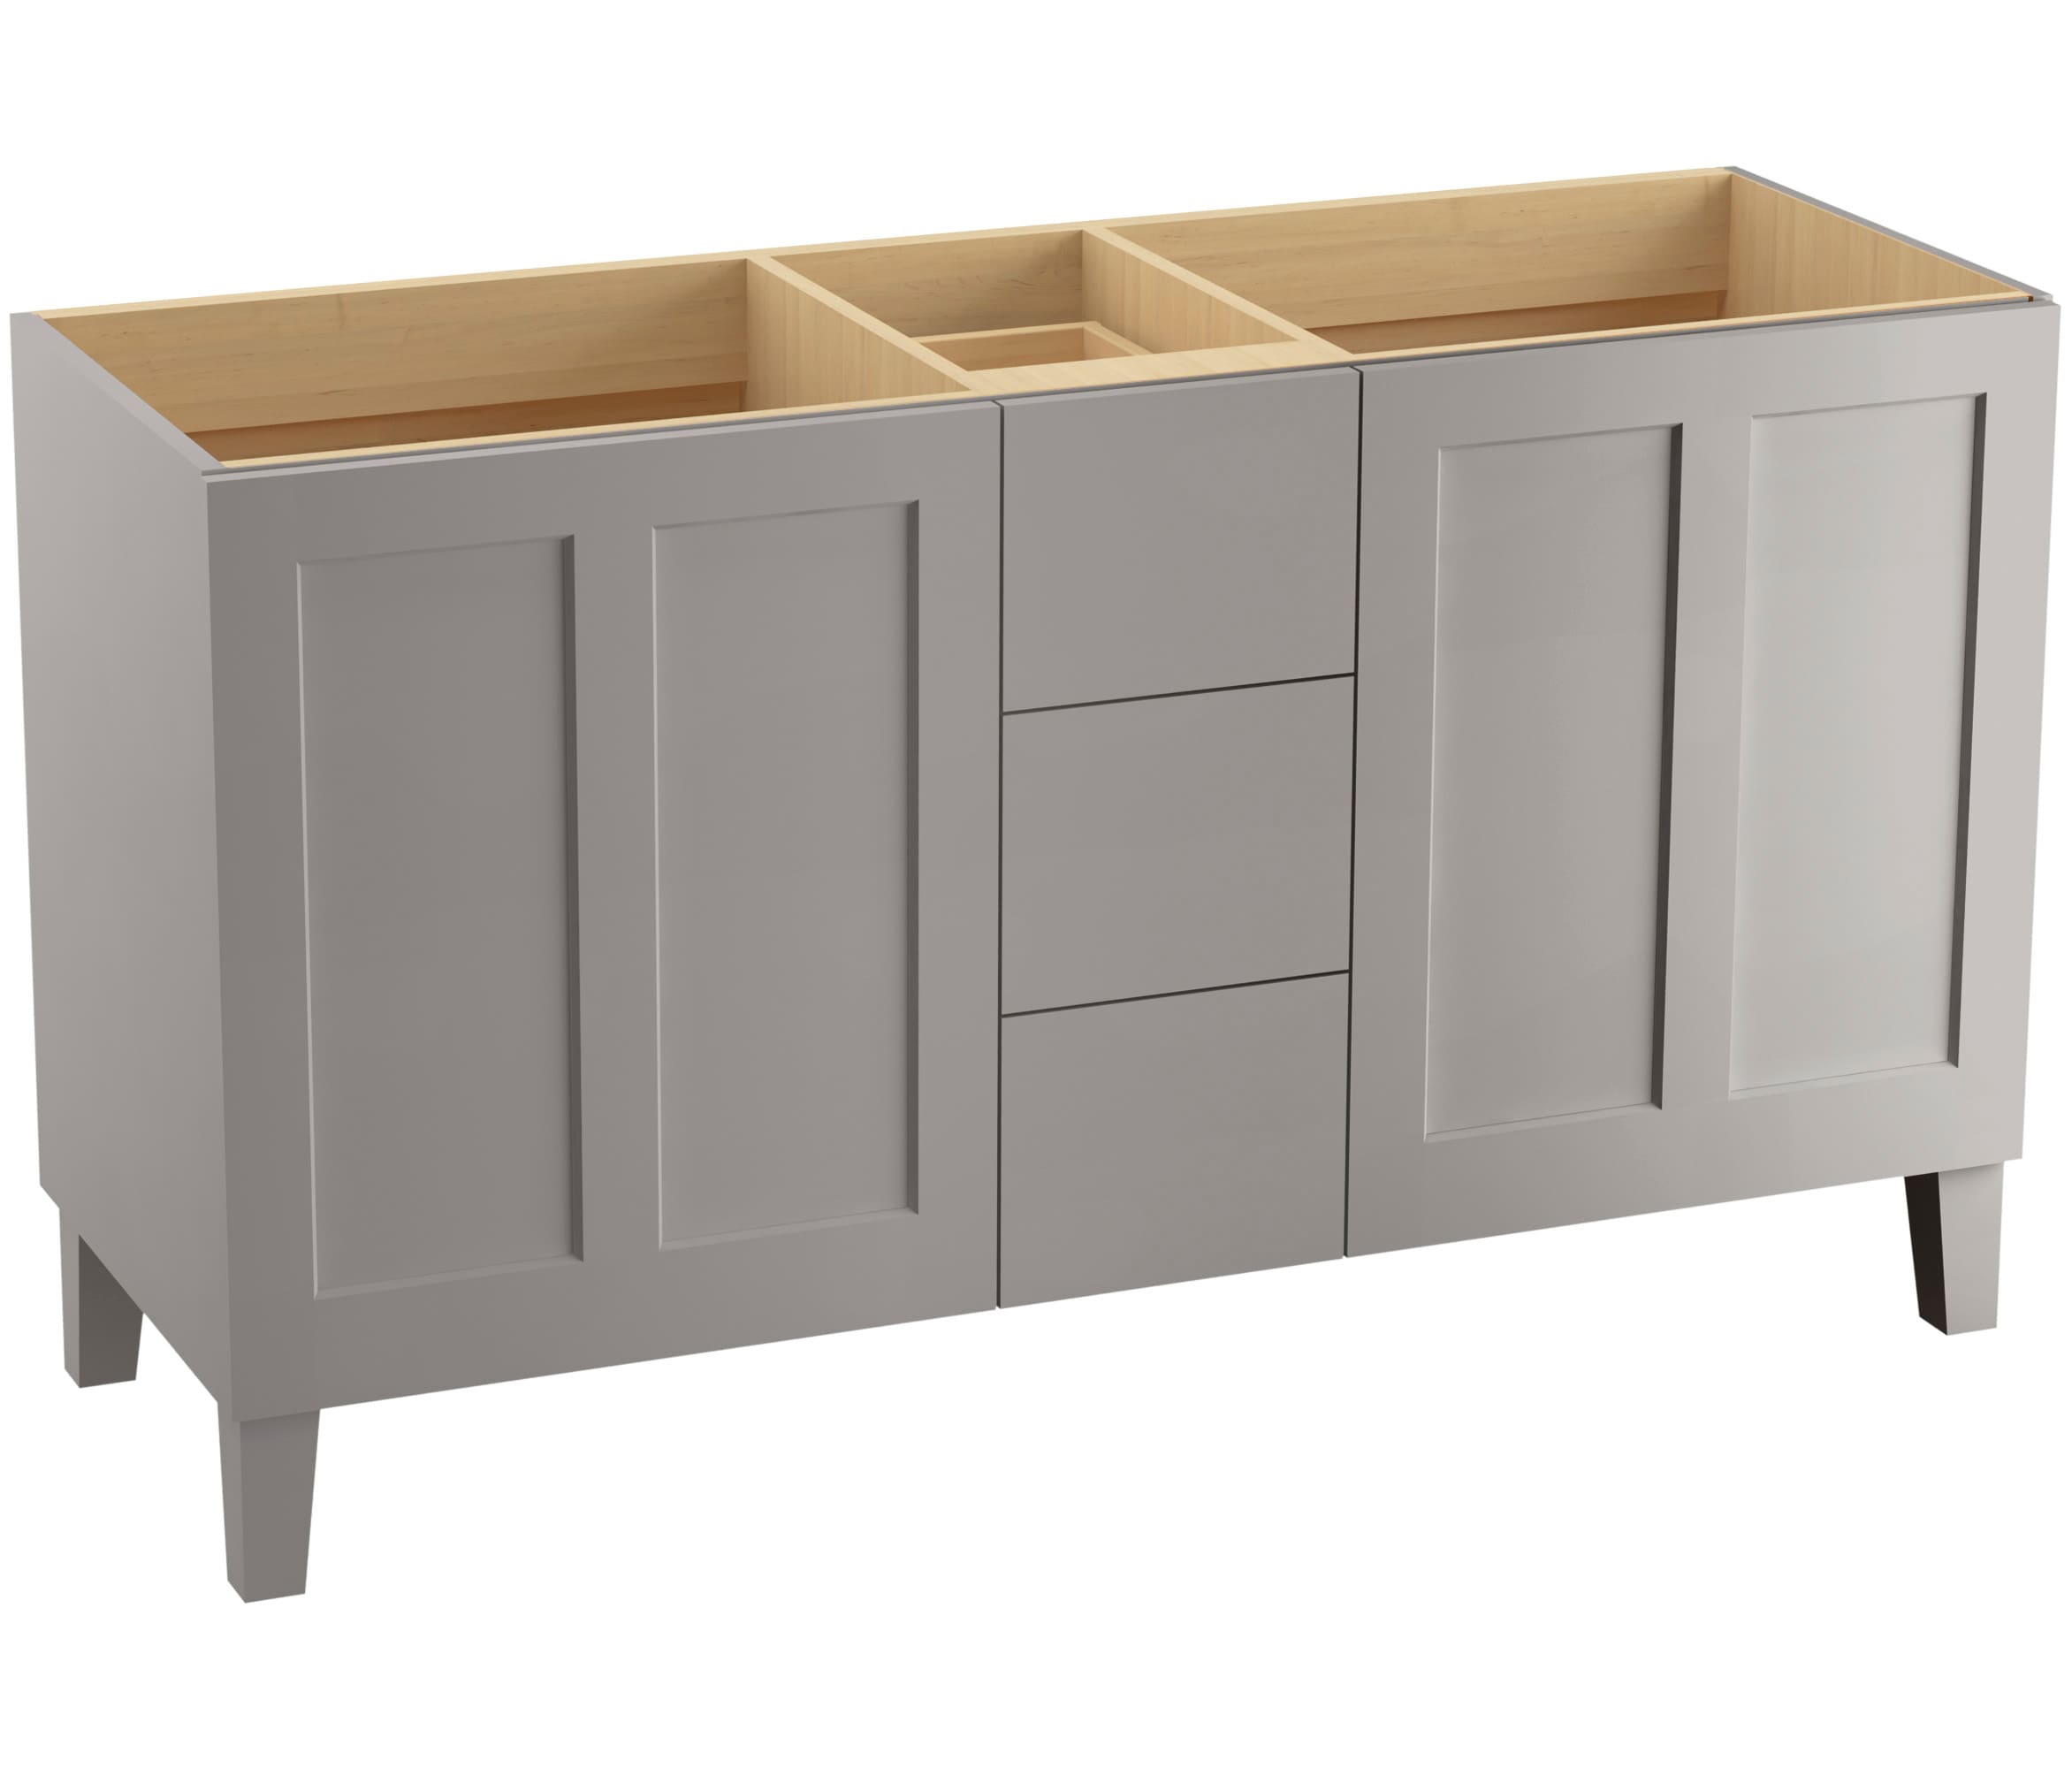 Poplin Collection K-99537-LG-1WT 60"" Freestanding Bathroom Vanity Cabinet with Legs  Two Doors and Three Drawers on Right Hand in Mohair -  Kohler, K99537LG1WT